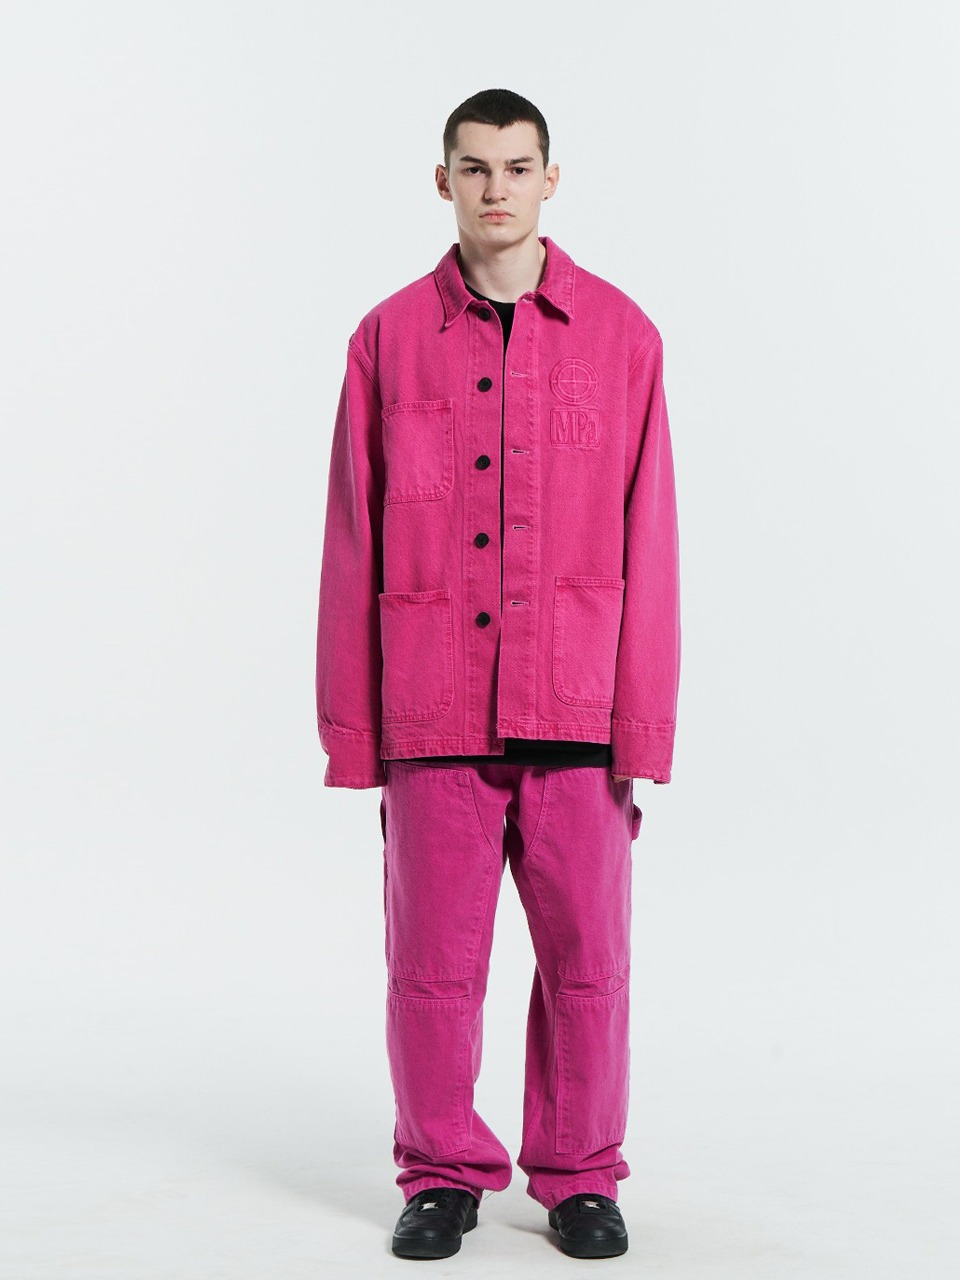 PLASTICPRODUCT - MPa WORK JACKET (PINK)